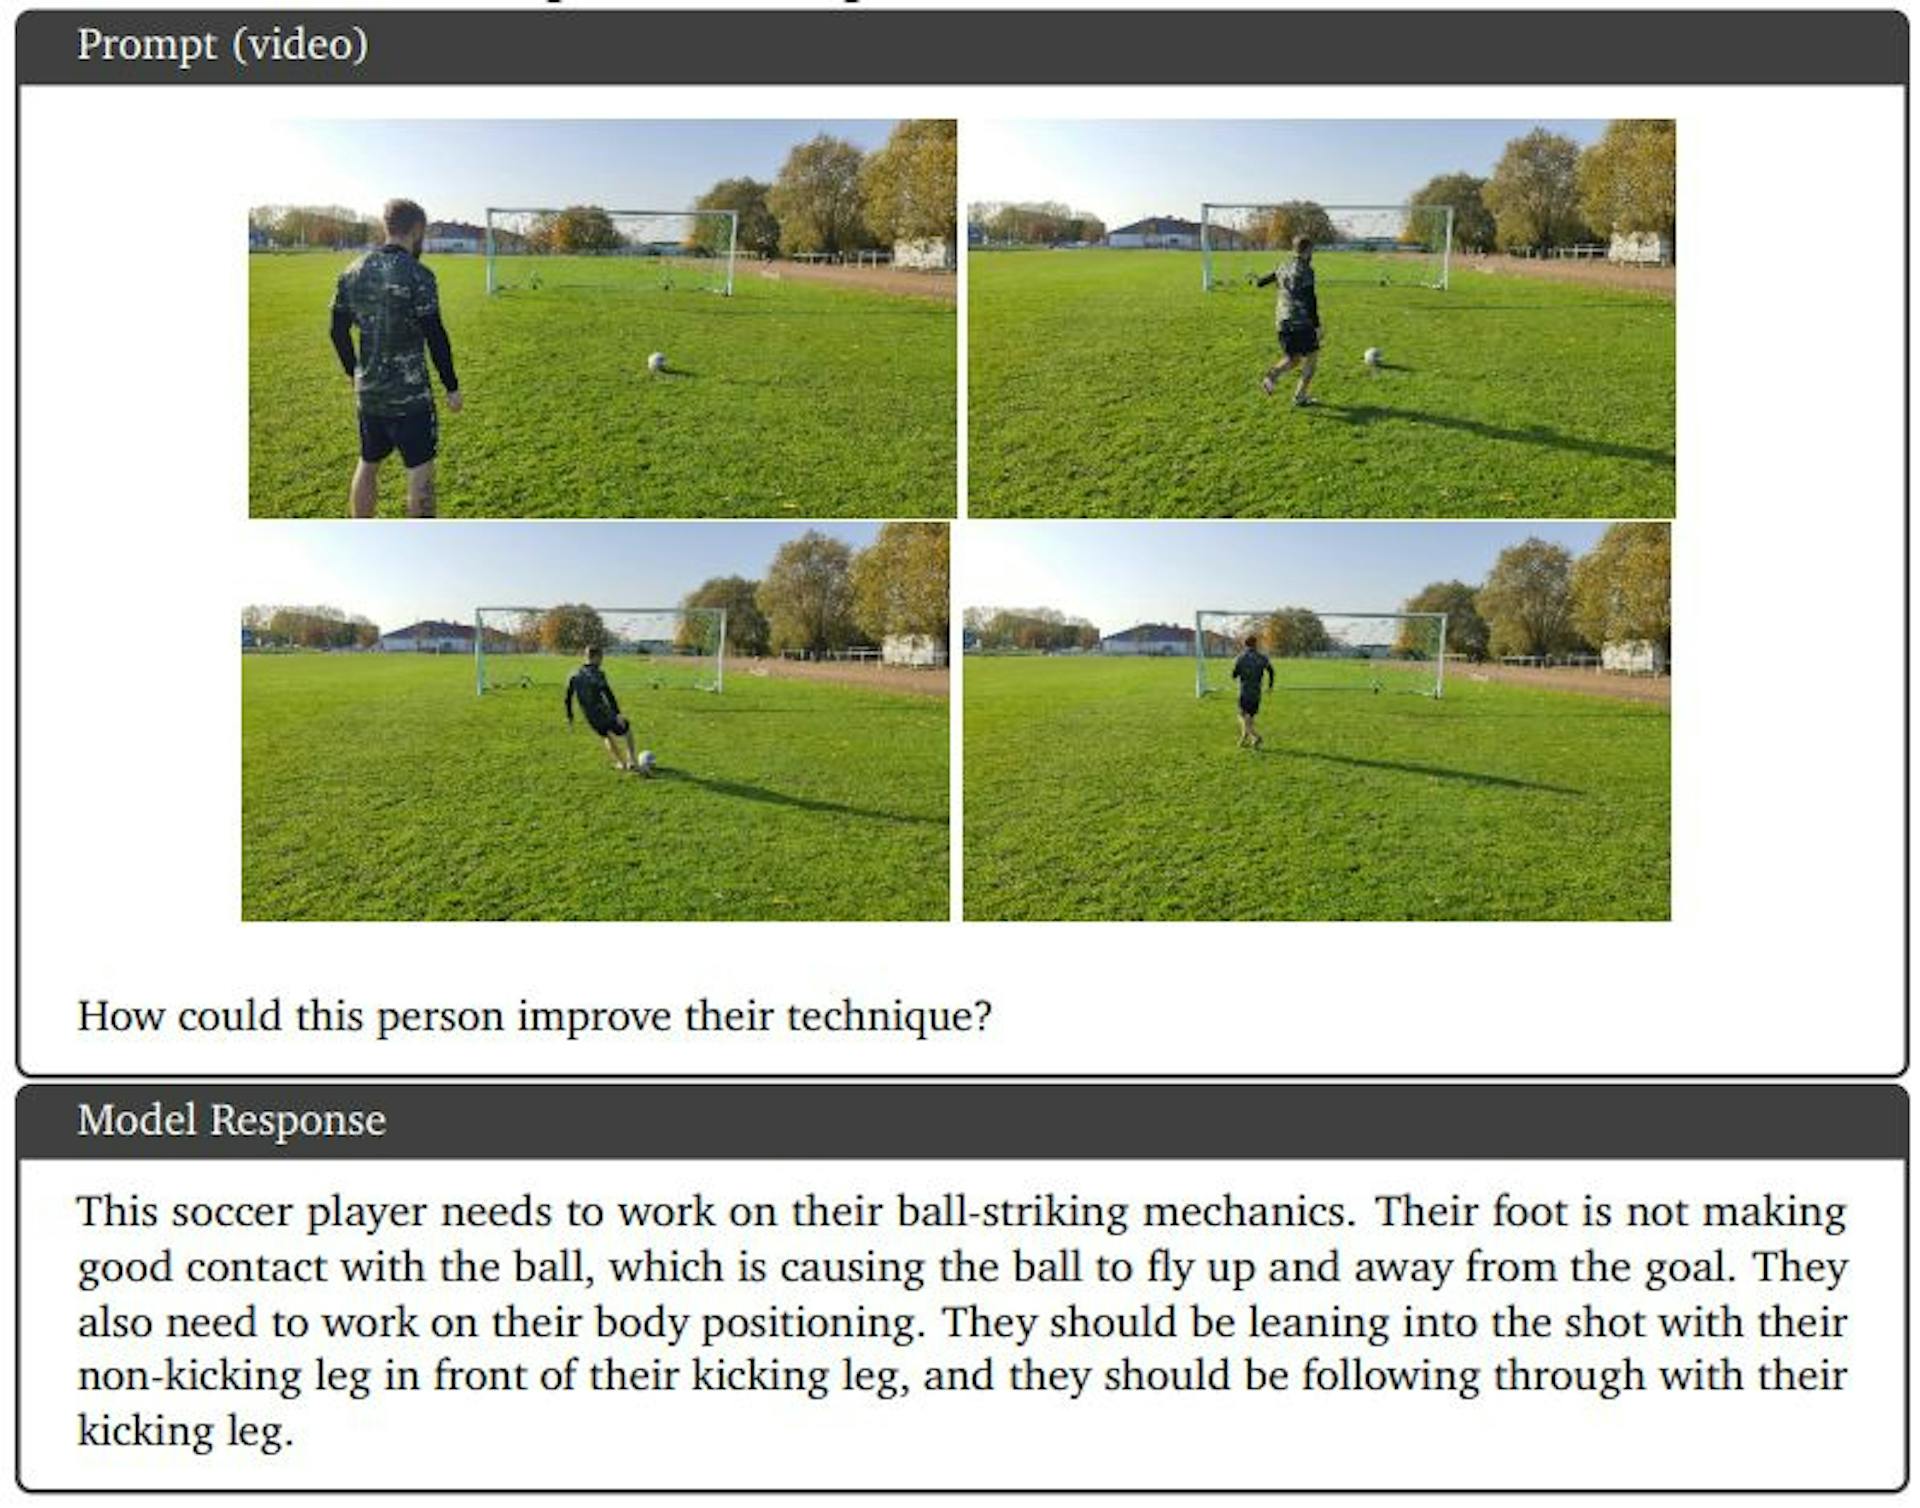 Figure 21 | Video understanding and reasoning over the situation presented in the video. Here, we provide a video as input to the model together with a text prompt (images are provided here only for visualization purposes). The model is able to analyze what happened in the video and provide recommendations on how the actions in the video could have been better. Video source: "Football/Soccer Penalty Miss"https://www.youtube.com/watch?v=VmWxjmJ3mvs